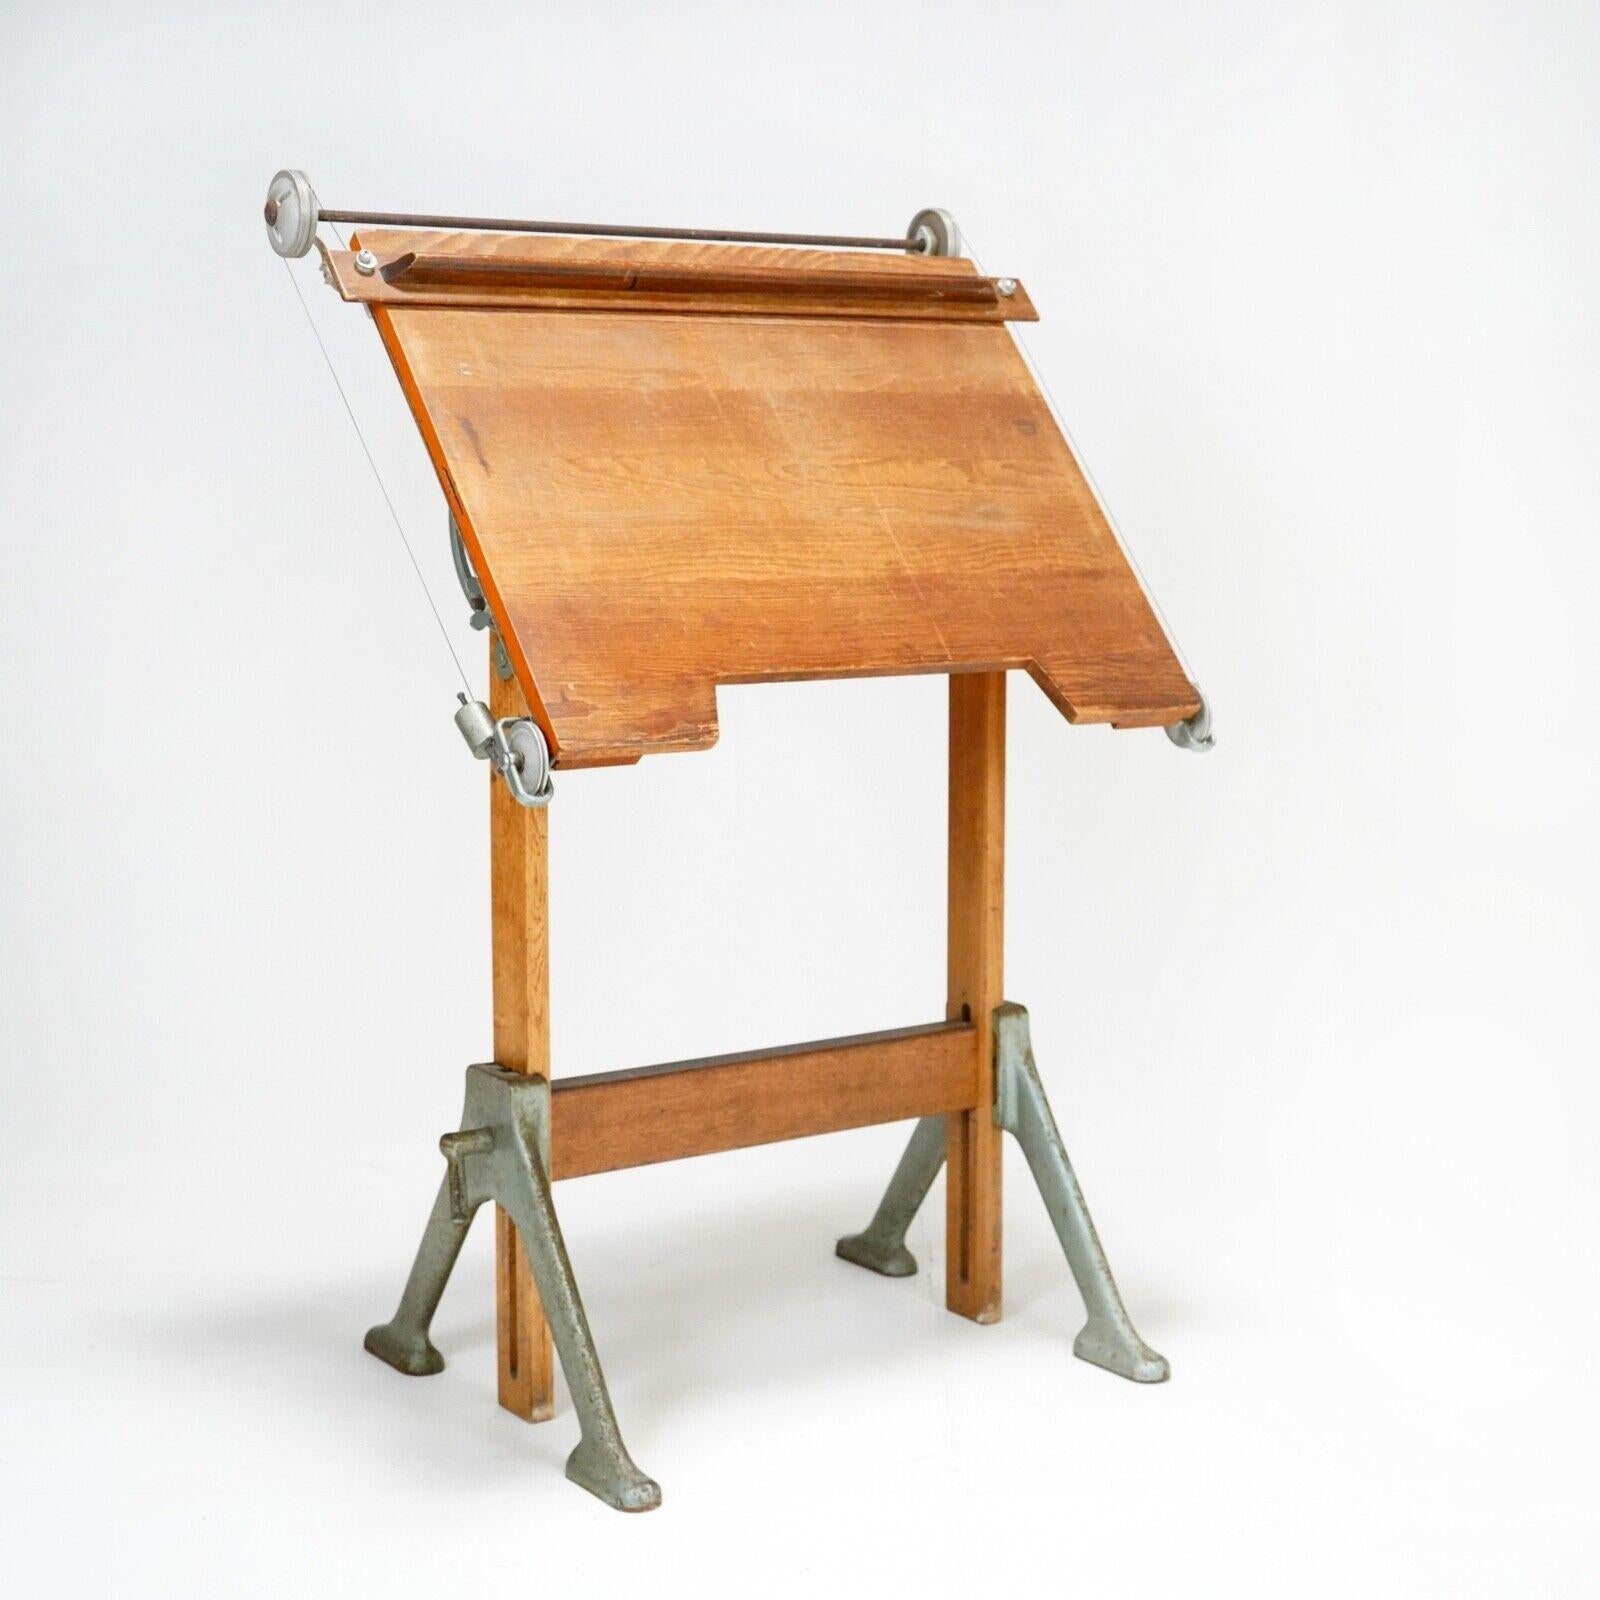 1940's Architect's Drafting Table - Midcentury Wooden & Iron Metal Base 4